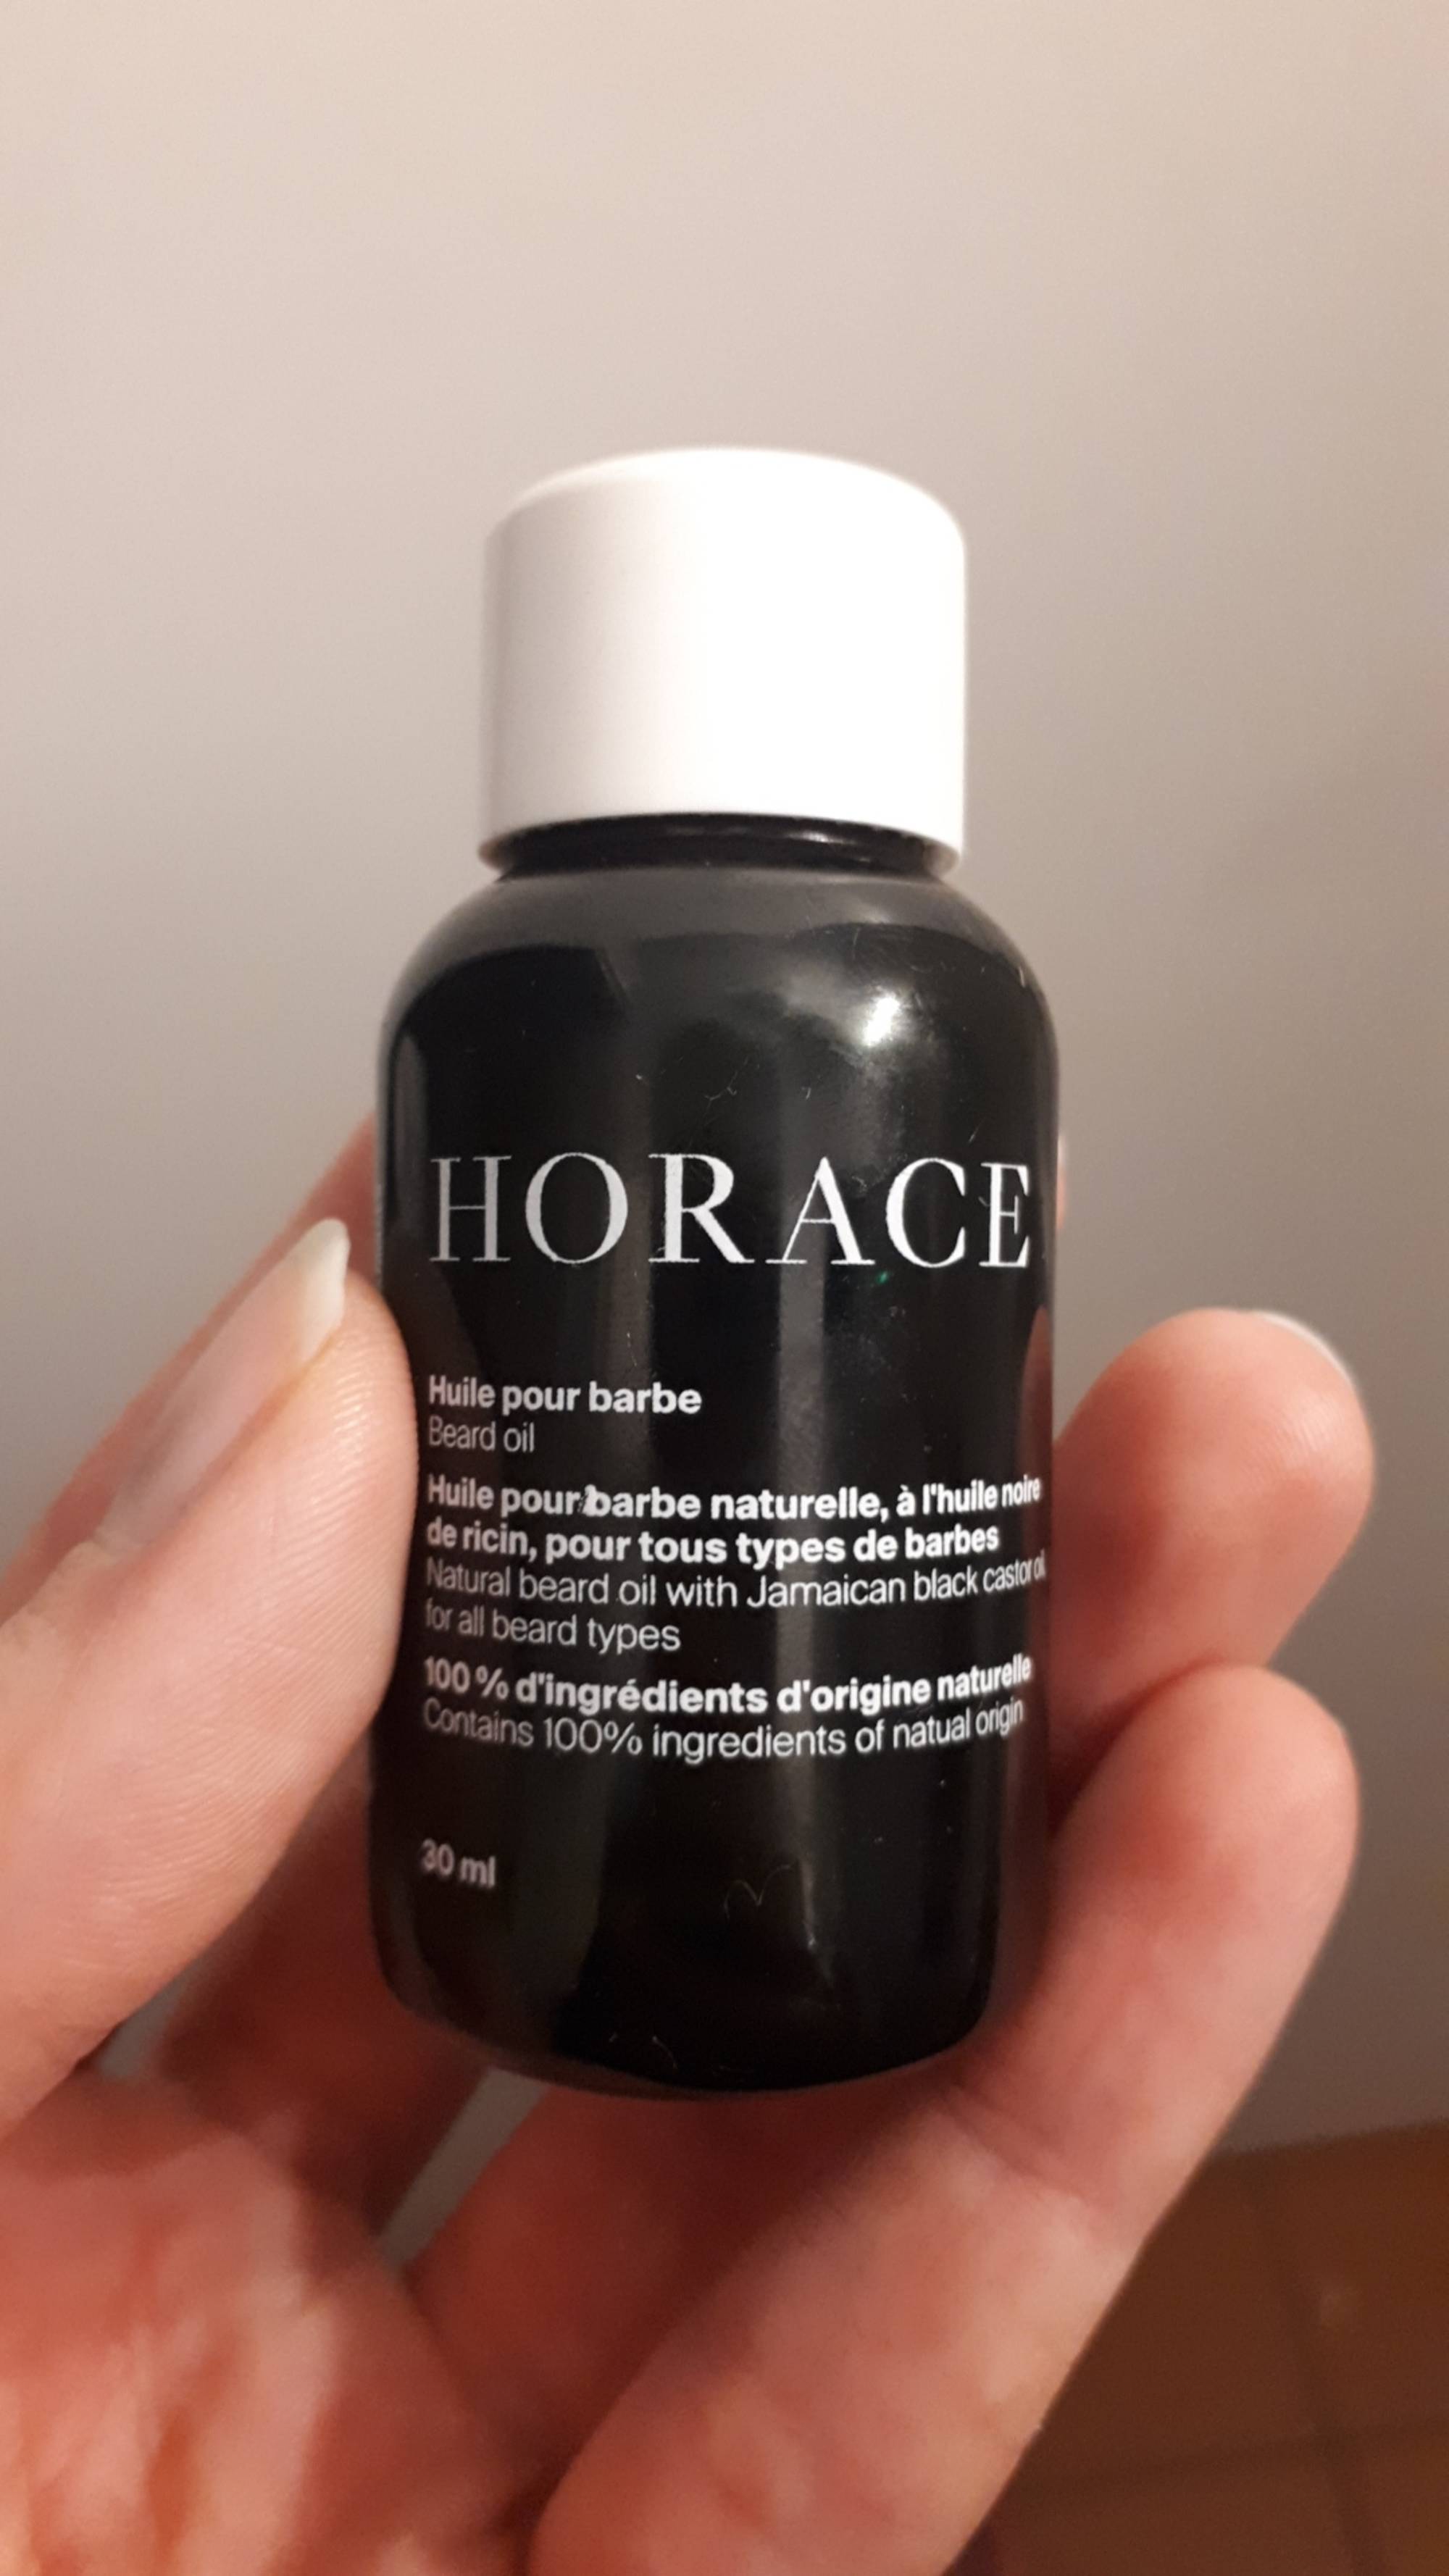 HORACE - Huile pour barbe